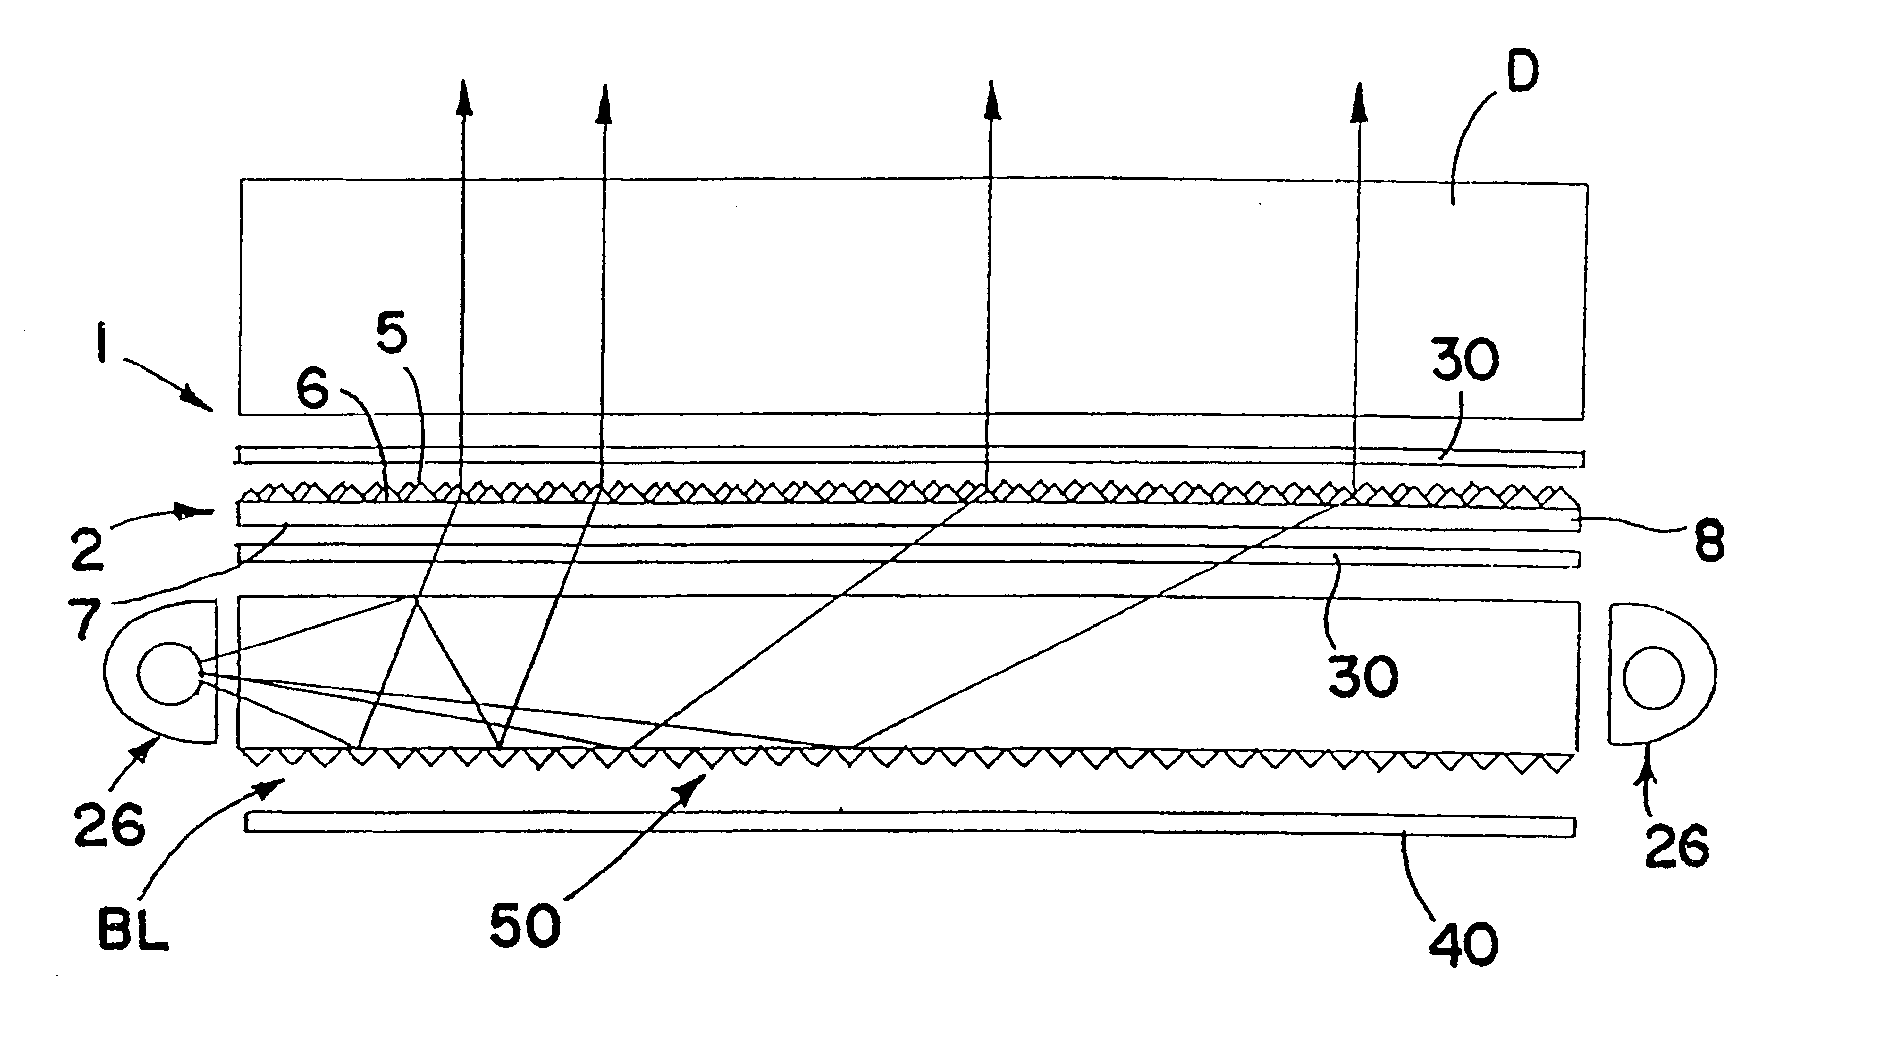 Optically transmissive substrates and light emitting assemblies and methods of making same, and methods of displaying images using the optically transmissive substrates and light emitting assemblies